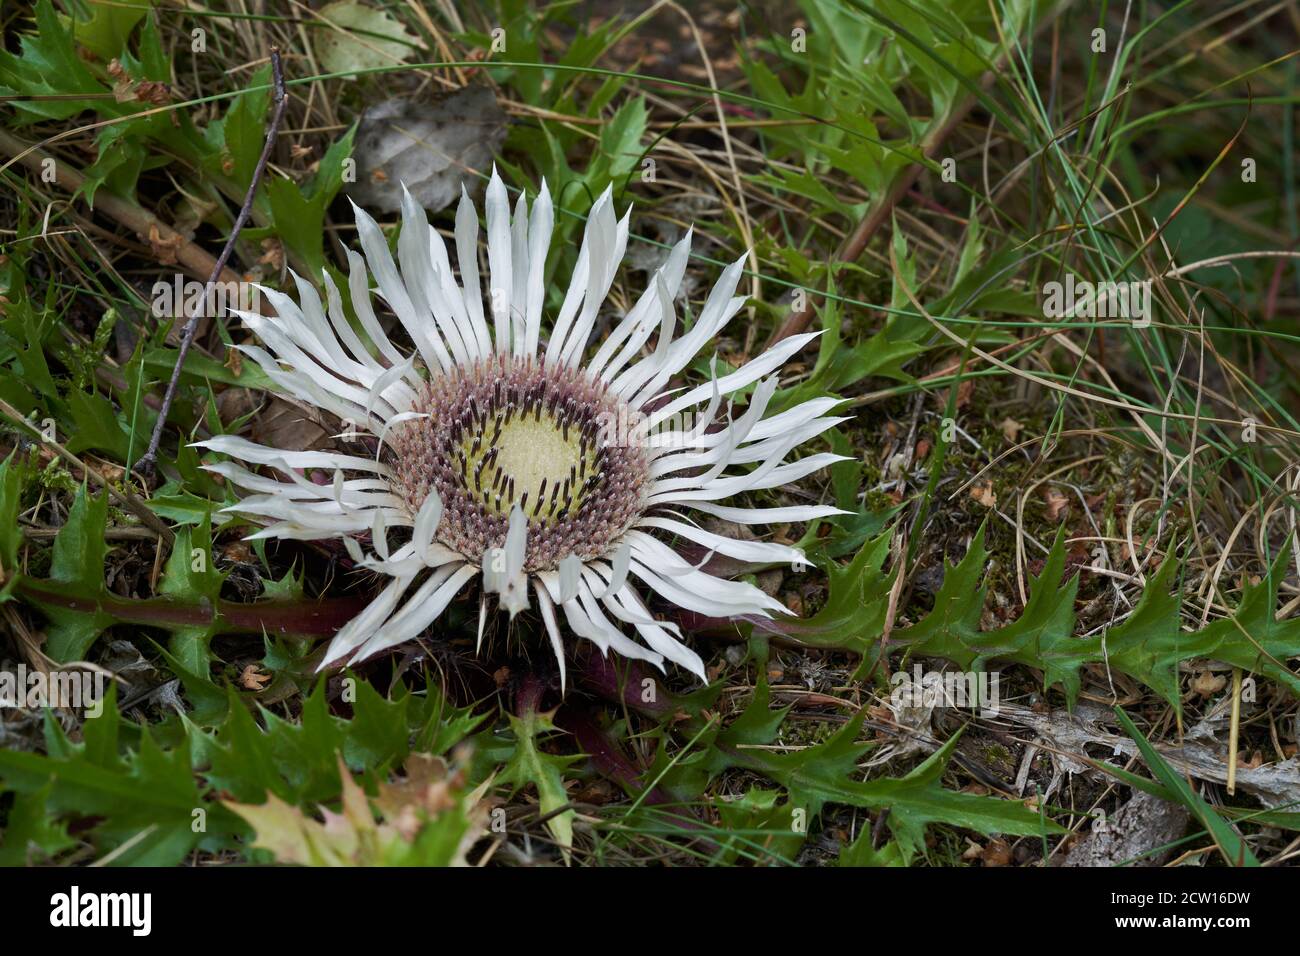 Medicinal plant Carlina acaulis on the edge of birch forest. Known as Silver Thistle or Stemless Carline-thistle. Natural condition. Stock Photo